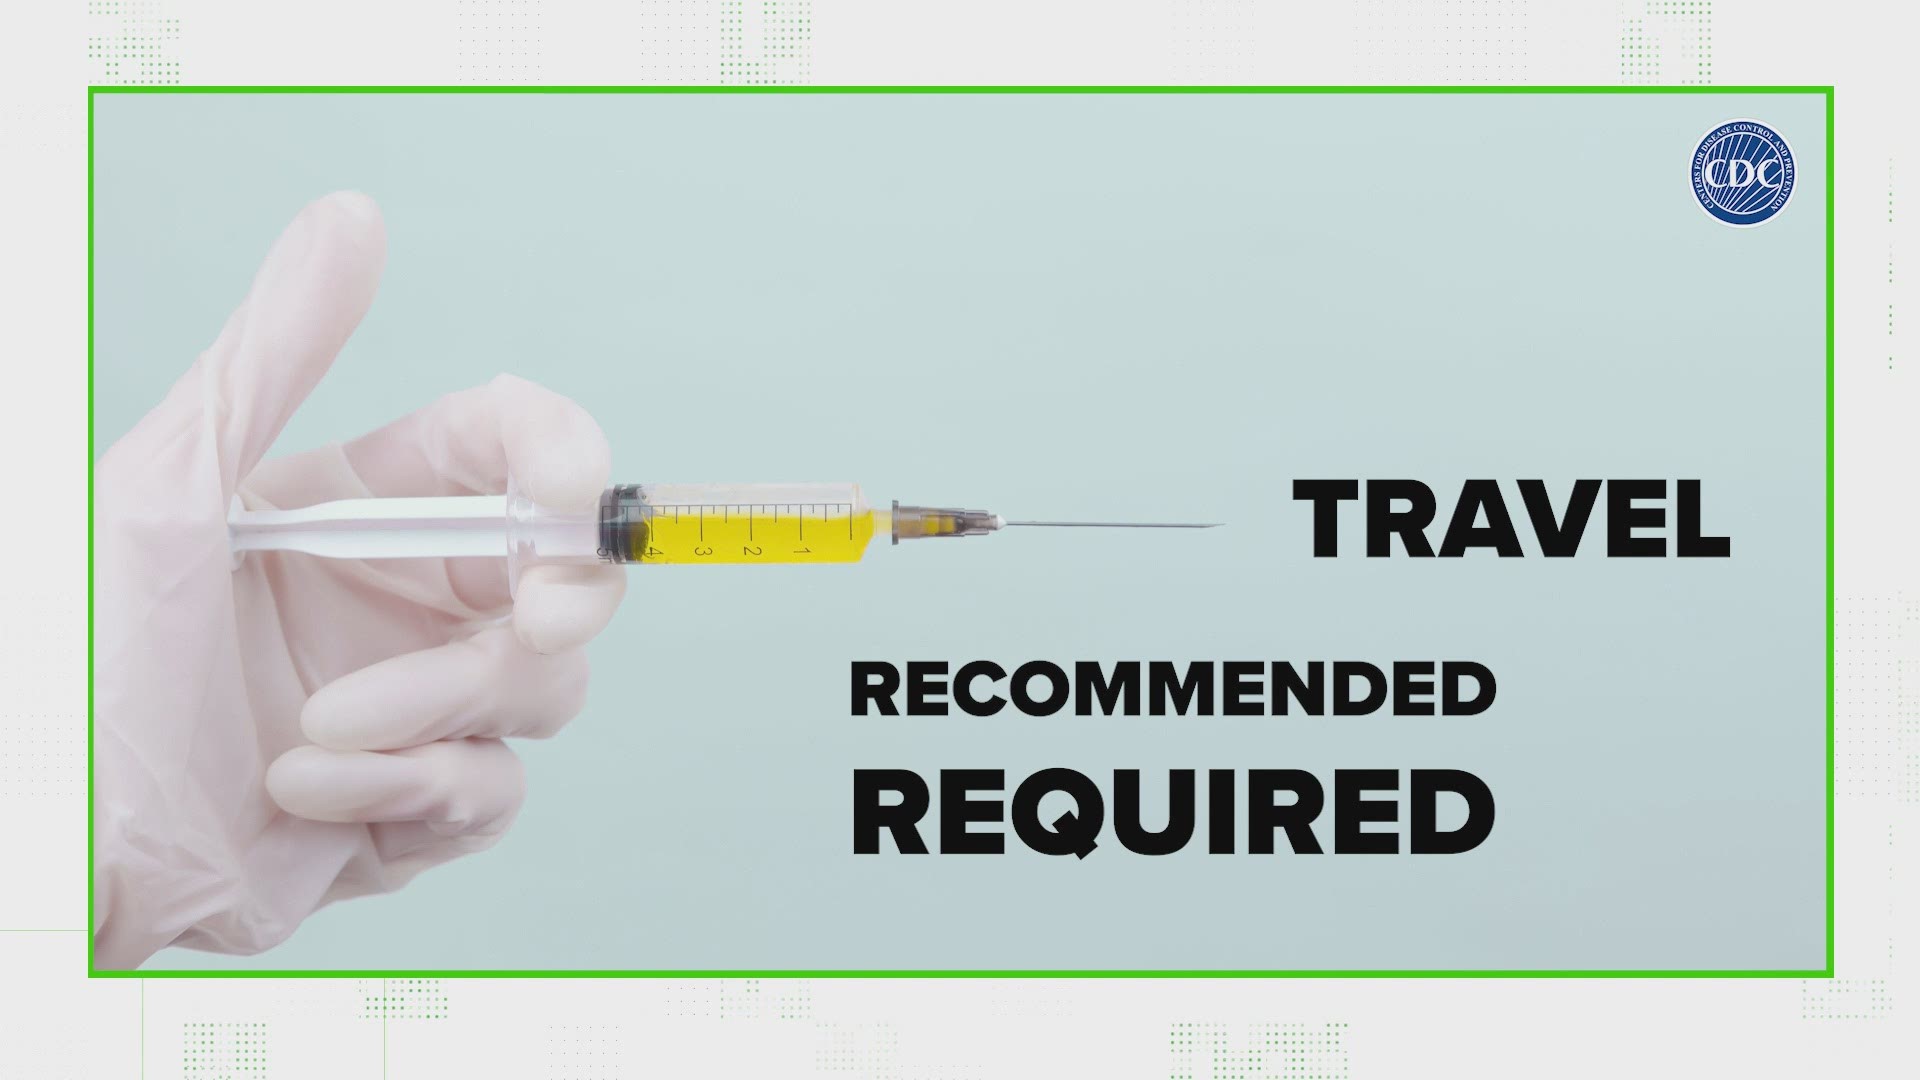 The legality of requiring a COVID-19 vaccine to travel within the U.S. has been a hot topic in recent weeks.